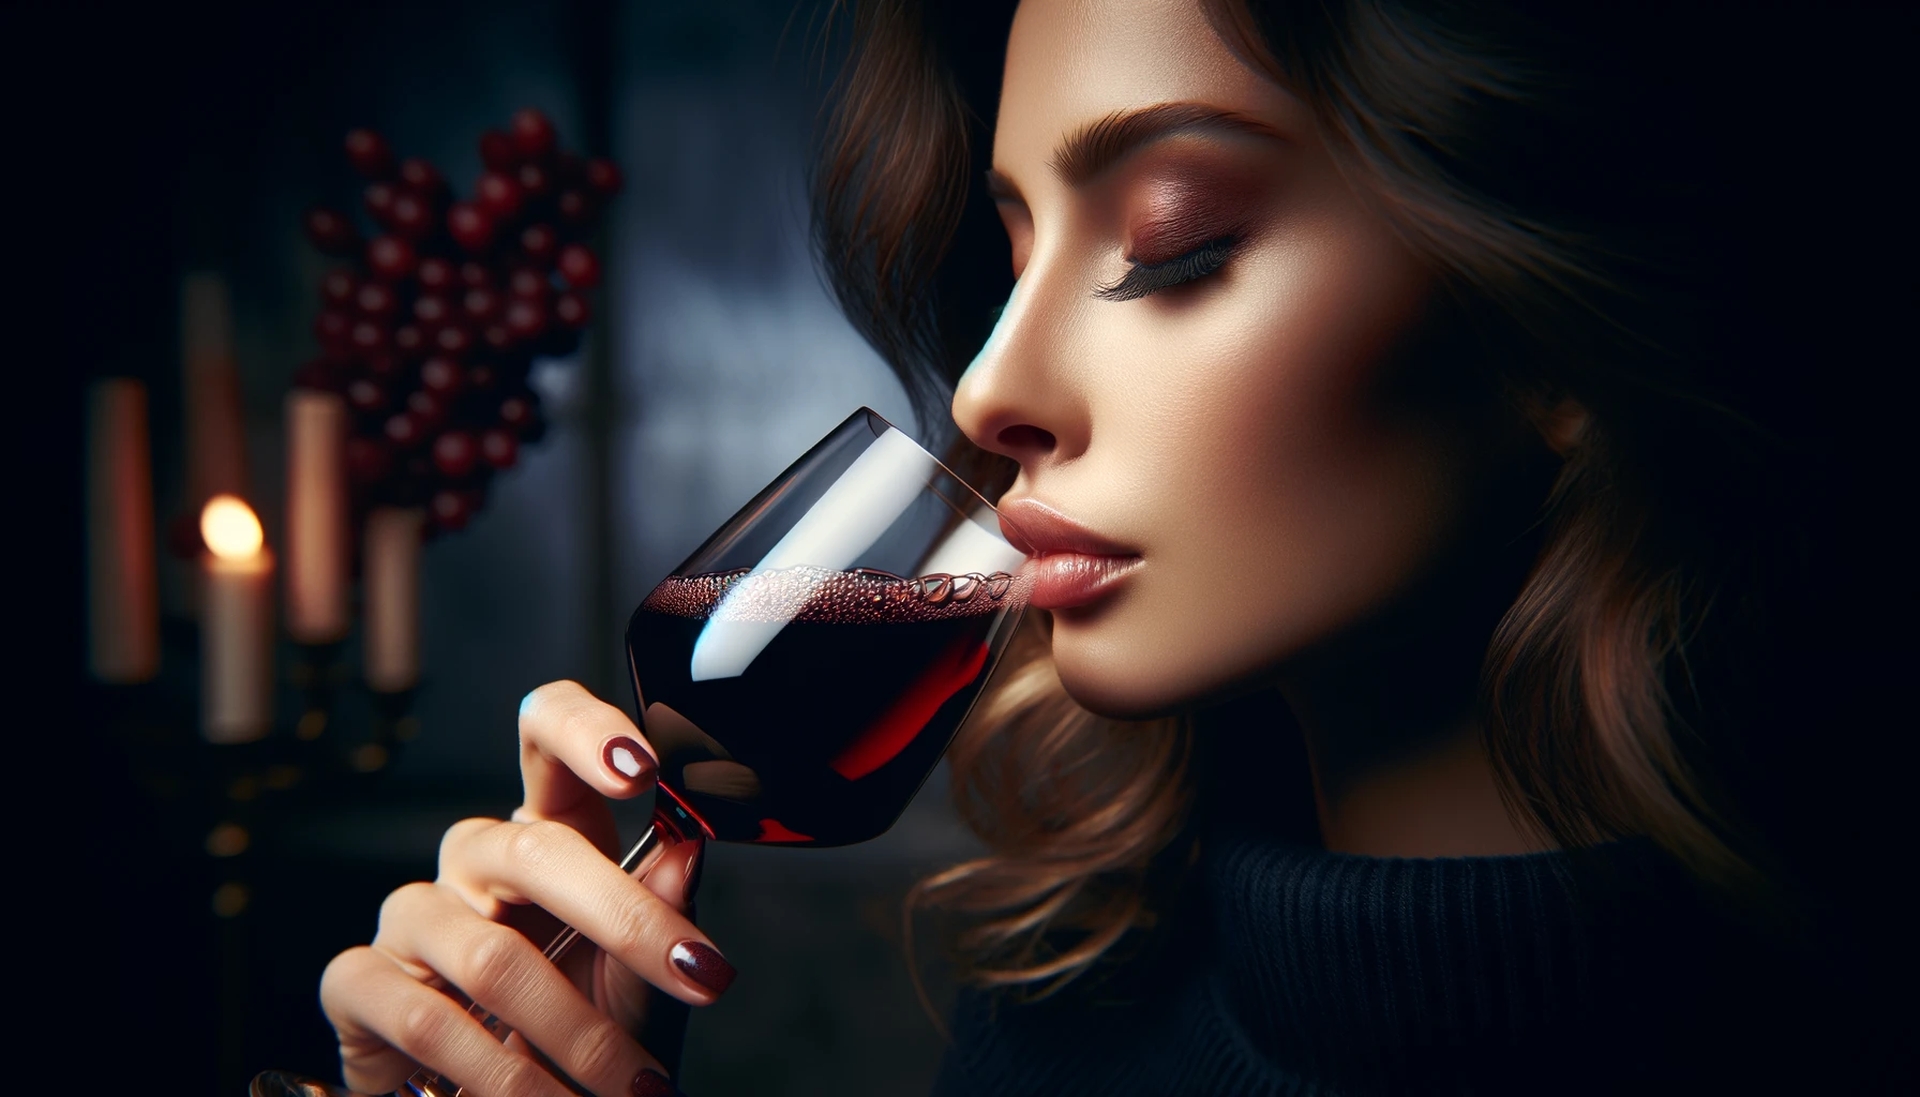 the images depicting a glass of red wine with intense burgundy hues being savored, capturing the moment with a close-up of a person's face as they experience the mouth-puckering after taste. - Image credit: Encyclopedia Wines